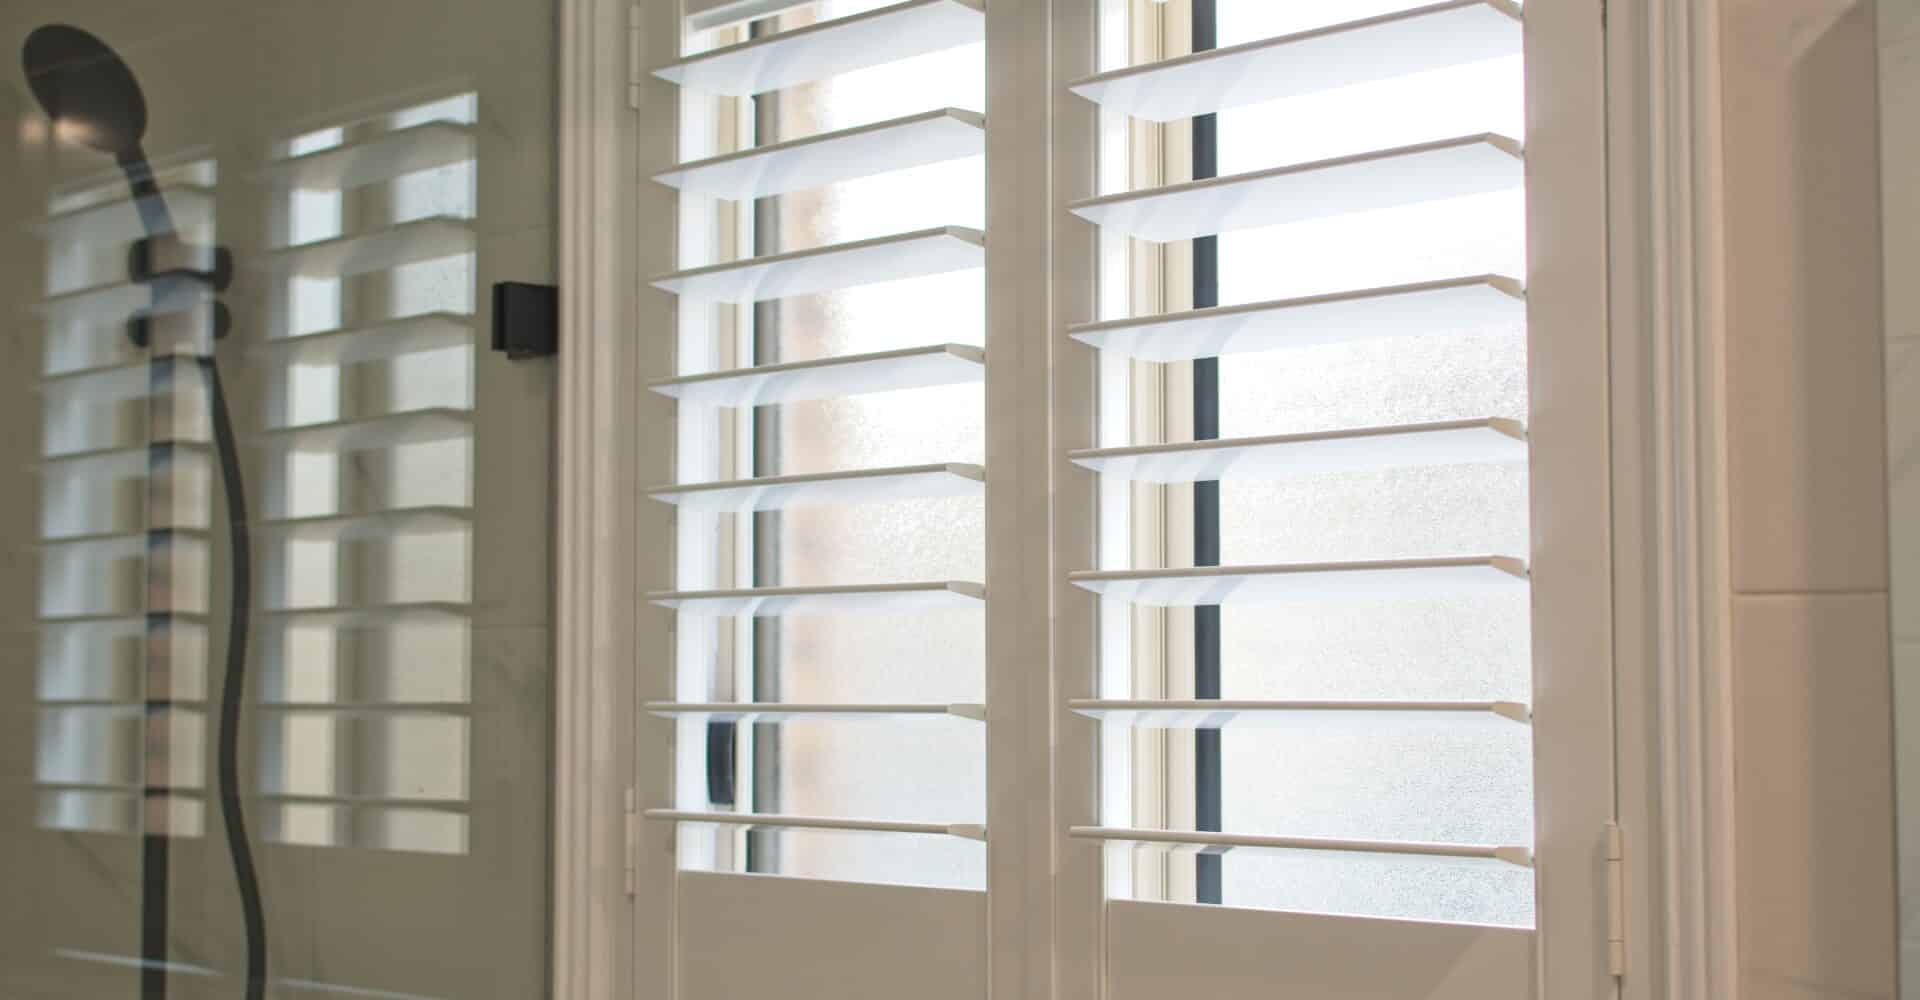 Shutter and Blinds in Peachtree City, GA